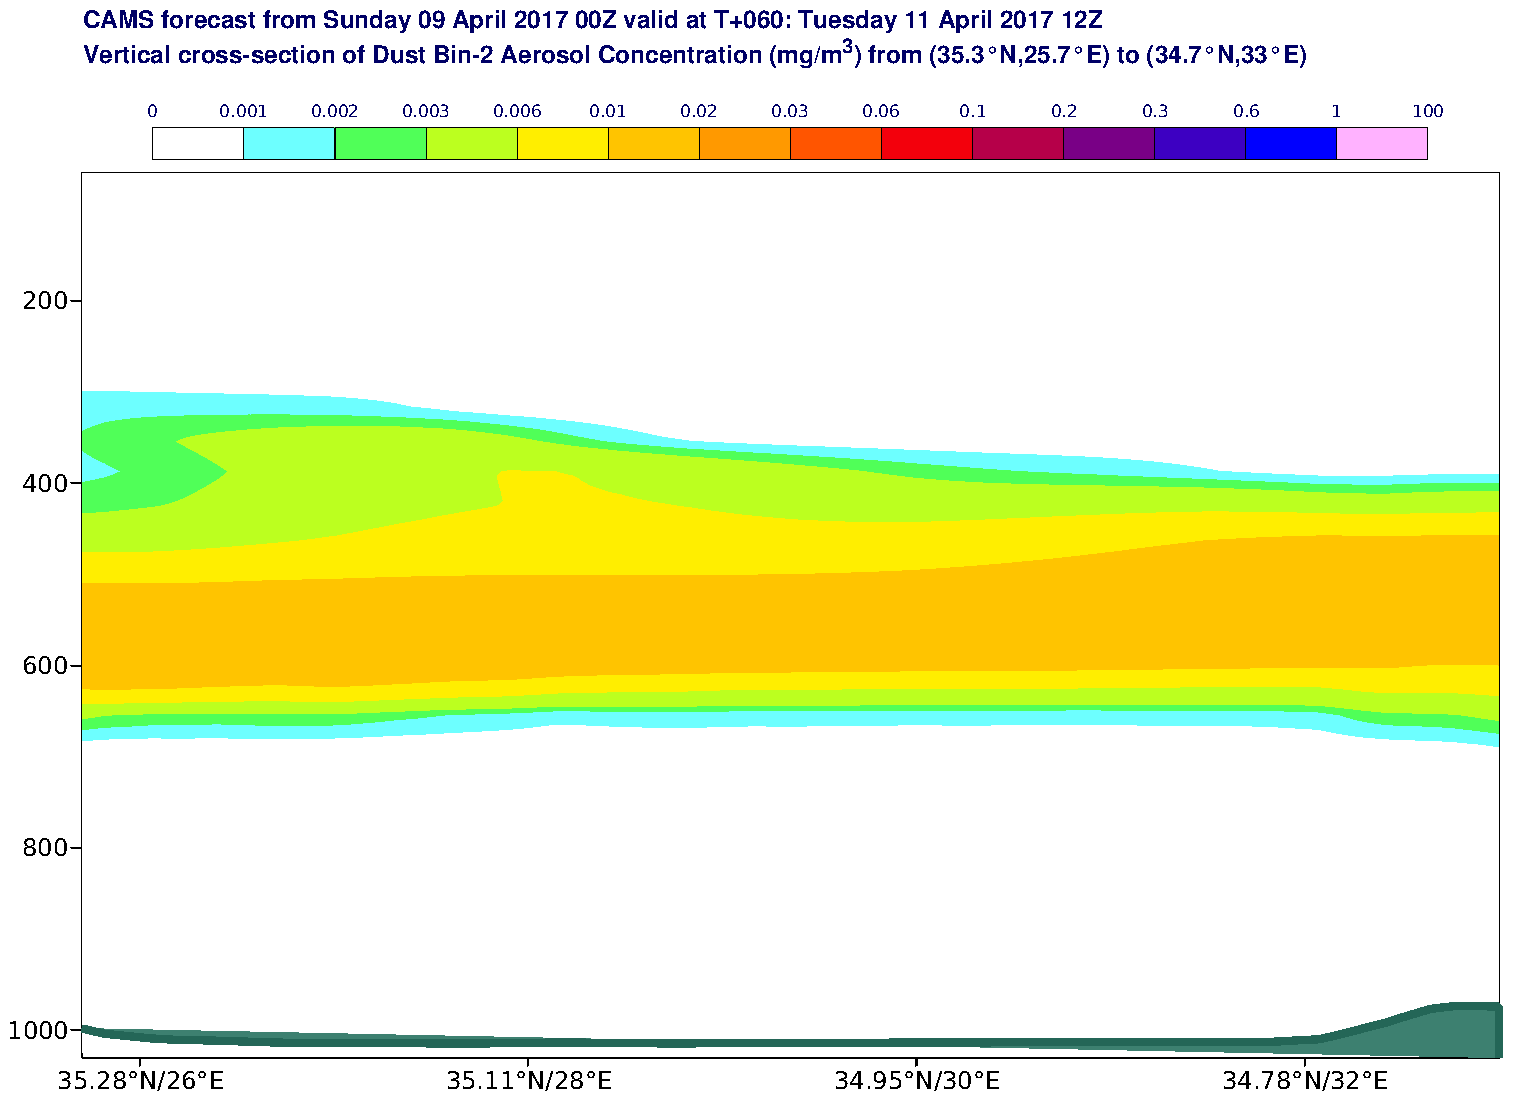 Vertical cross-section of Dust Bin-2 Aerosol Concentration (mg/m3) valid at T60 - 2017-04-11 12:00